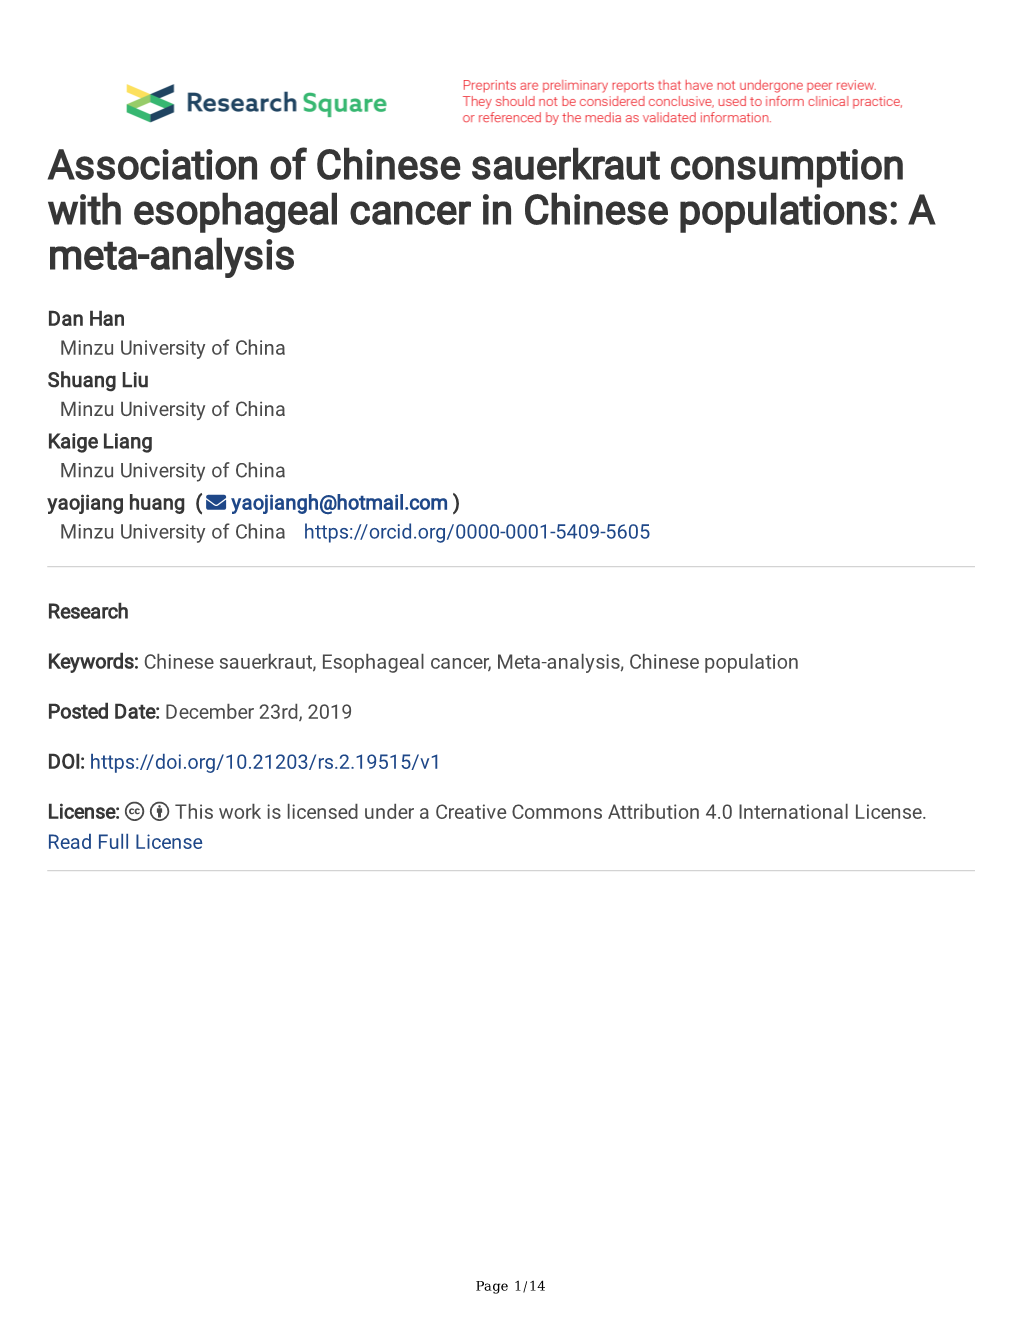 Association of Chinese Sauerkraut Consumption with Esophageal Cancer in Chinese Populations: a Meta-Analysis